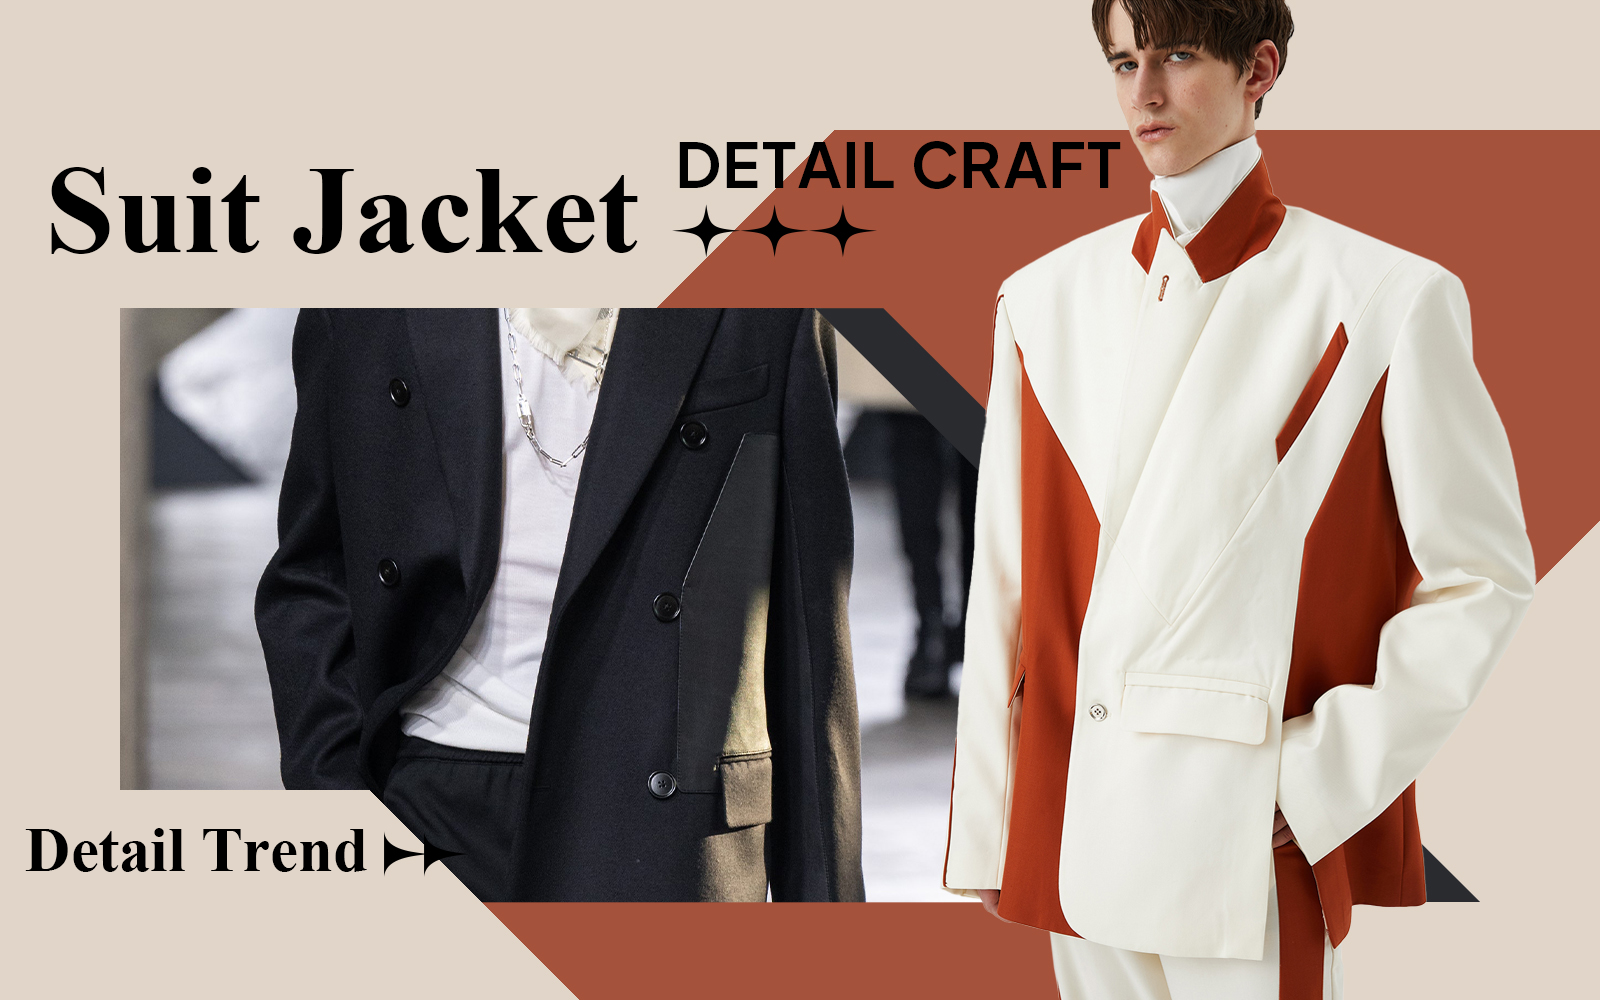 The Detail & Craft Trend for Men's Suit Jacket